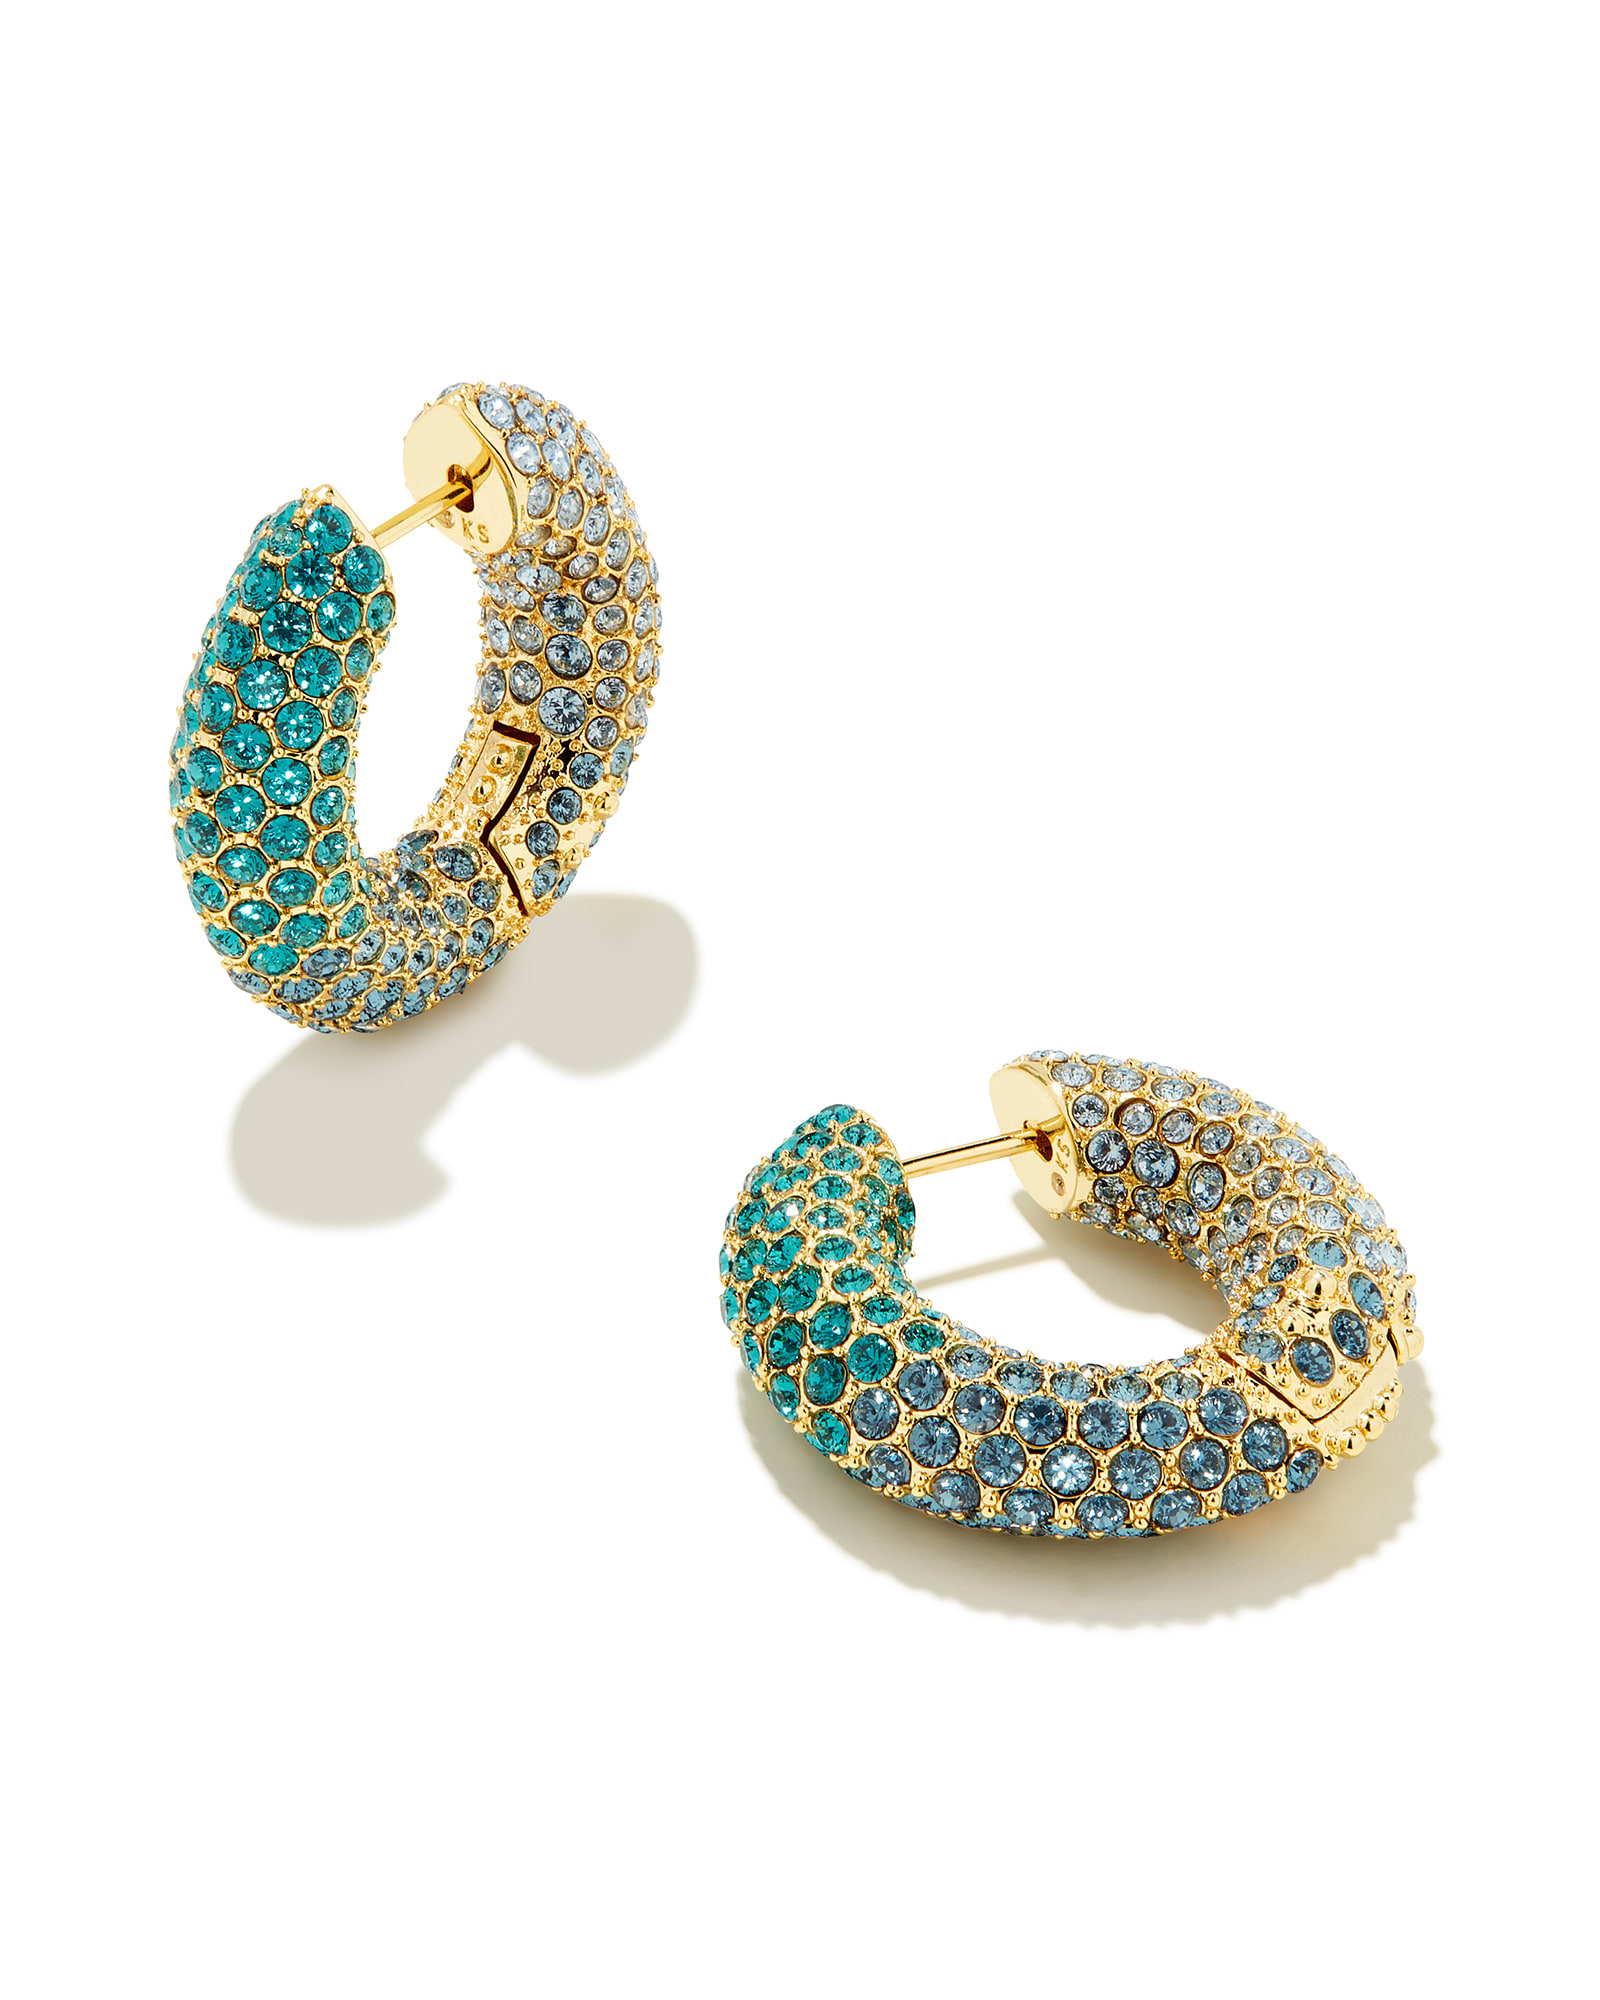 Photos - Earrings KENDRA SCOTT Mikki Gold Pave Hoop  in Green Blue Ombre Mix | Cryst 